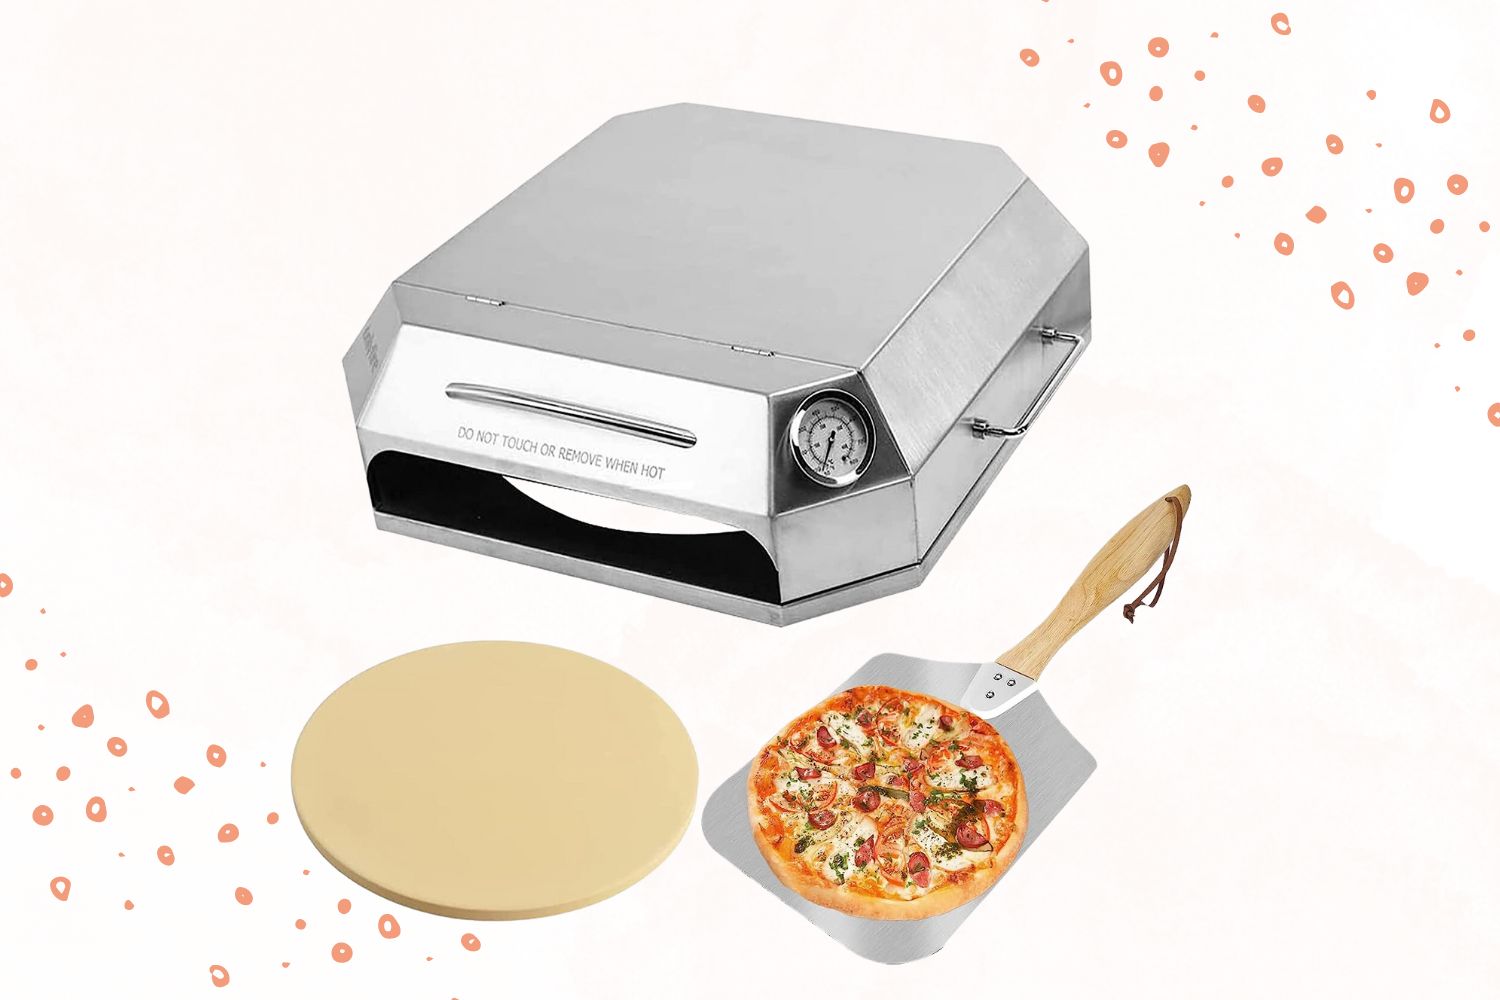 Onlyfire Stainless Steel Pizza Oven Kit